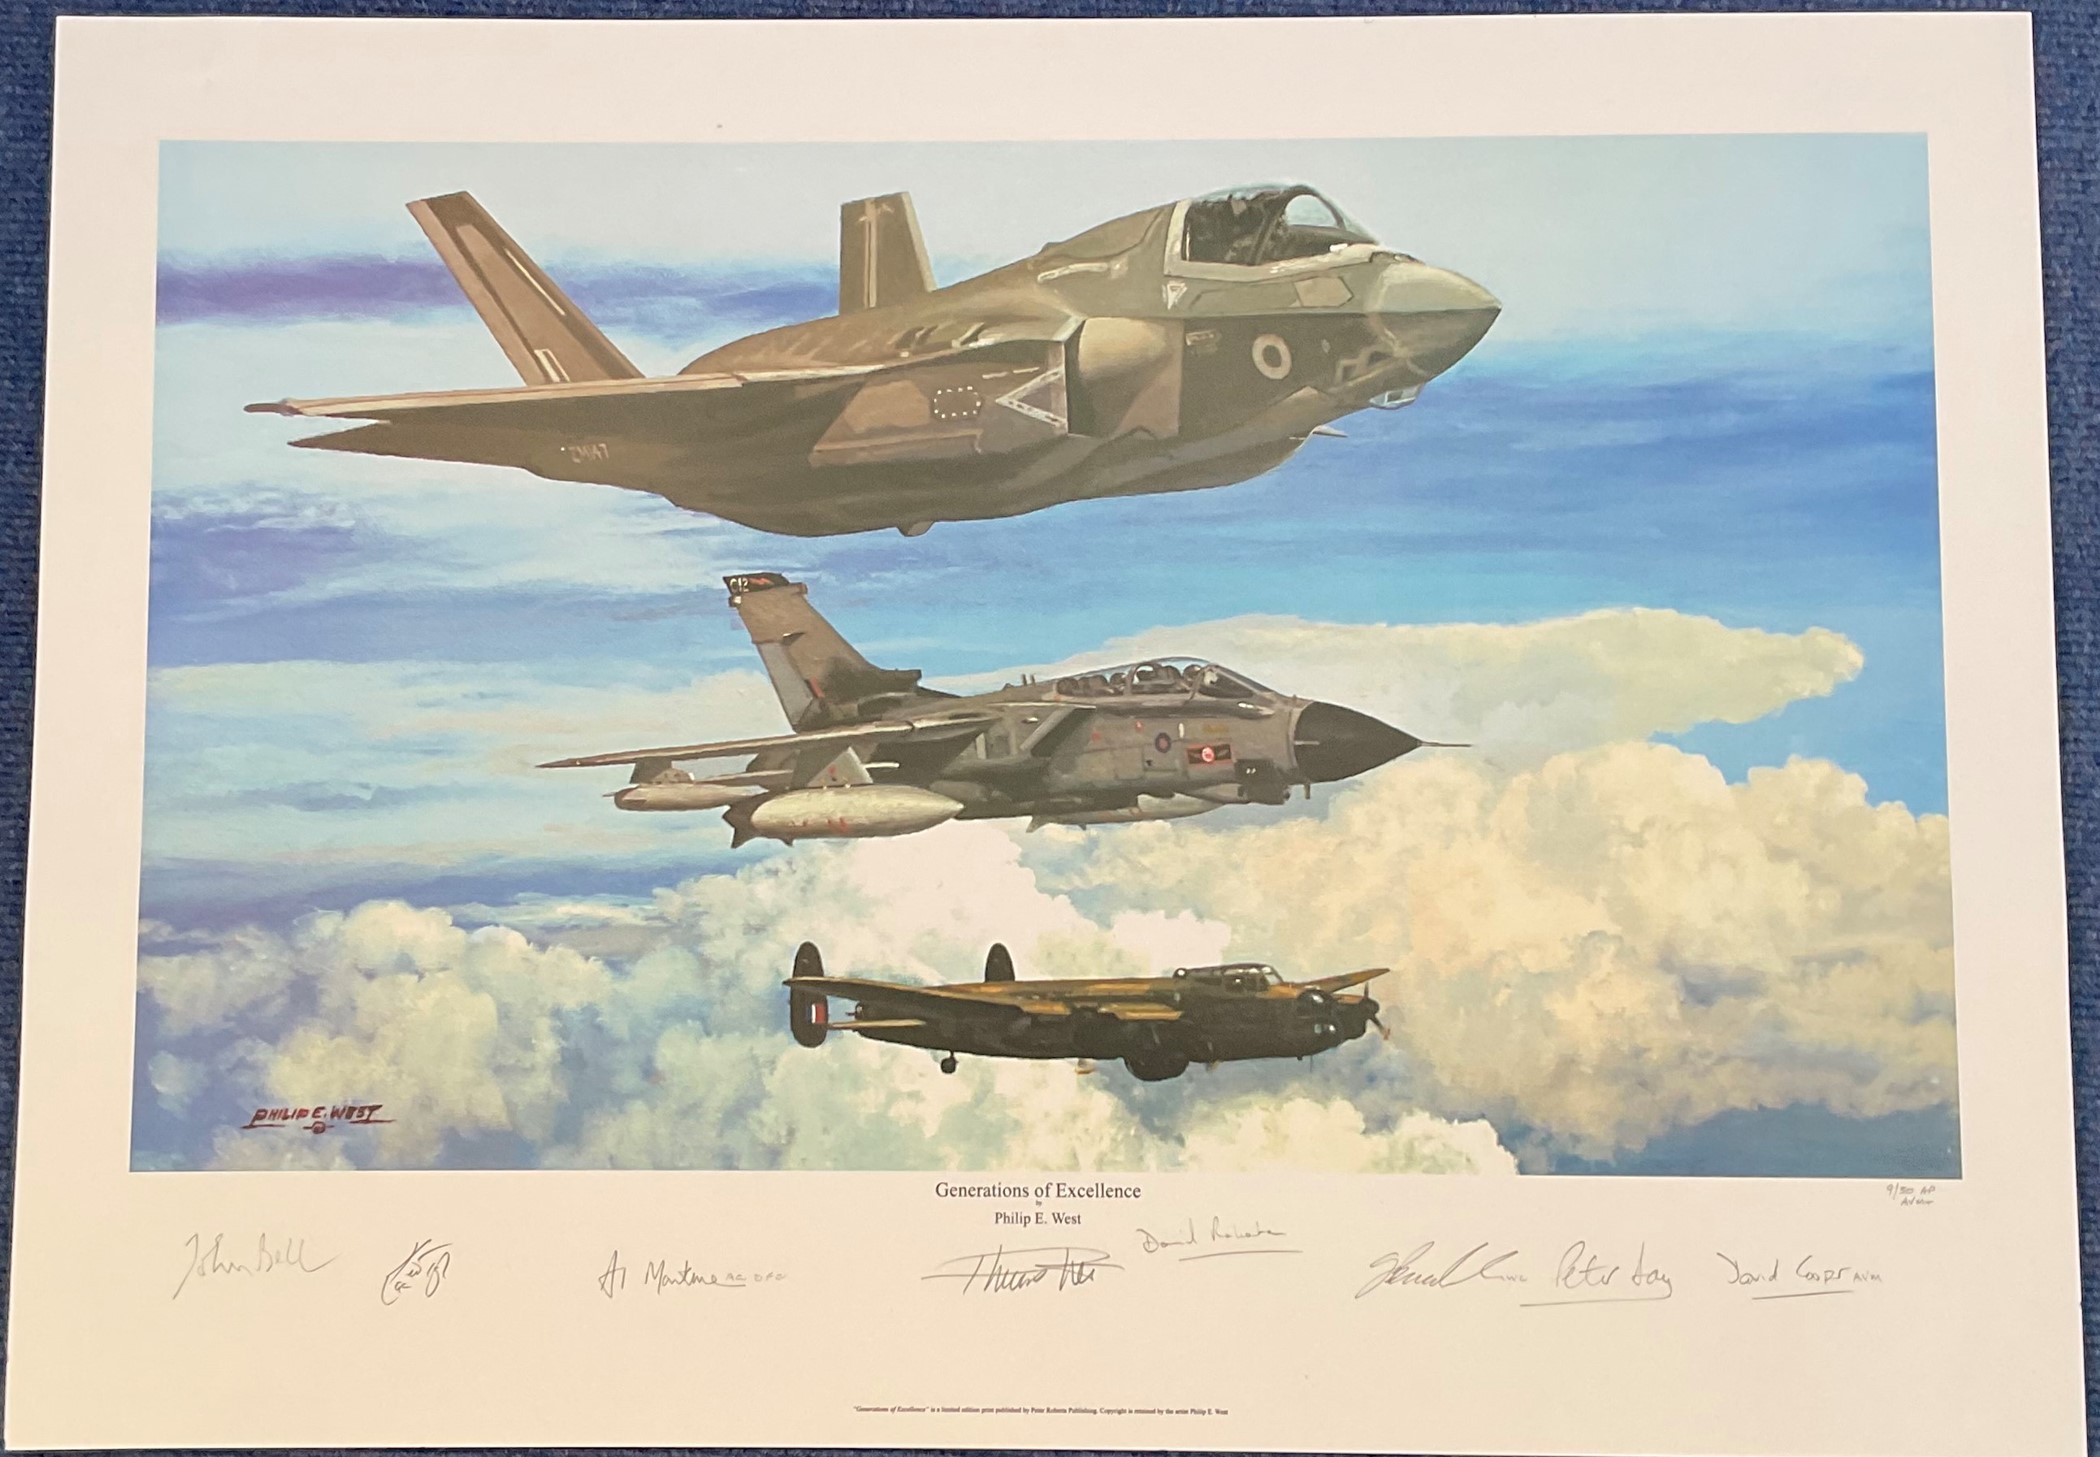 RAF Multi Signed print 19x25. titled Generations of Excellence by the artist Philip E West.